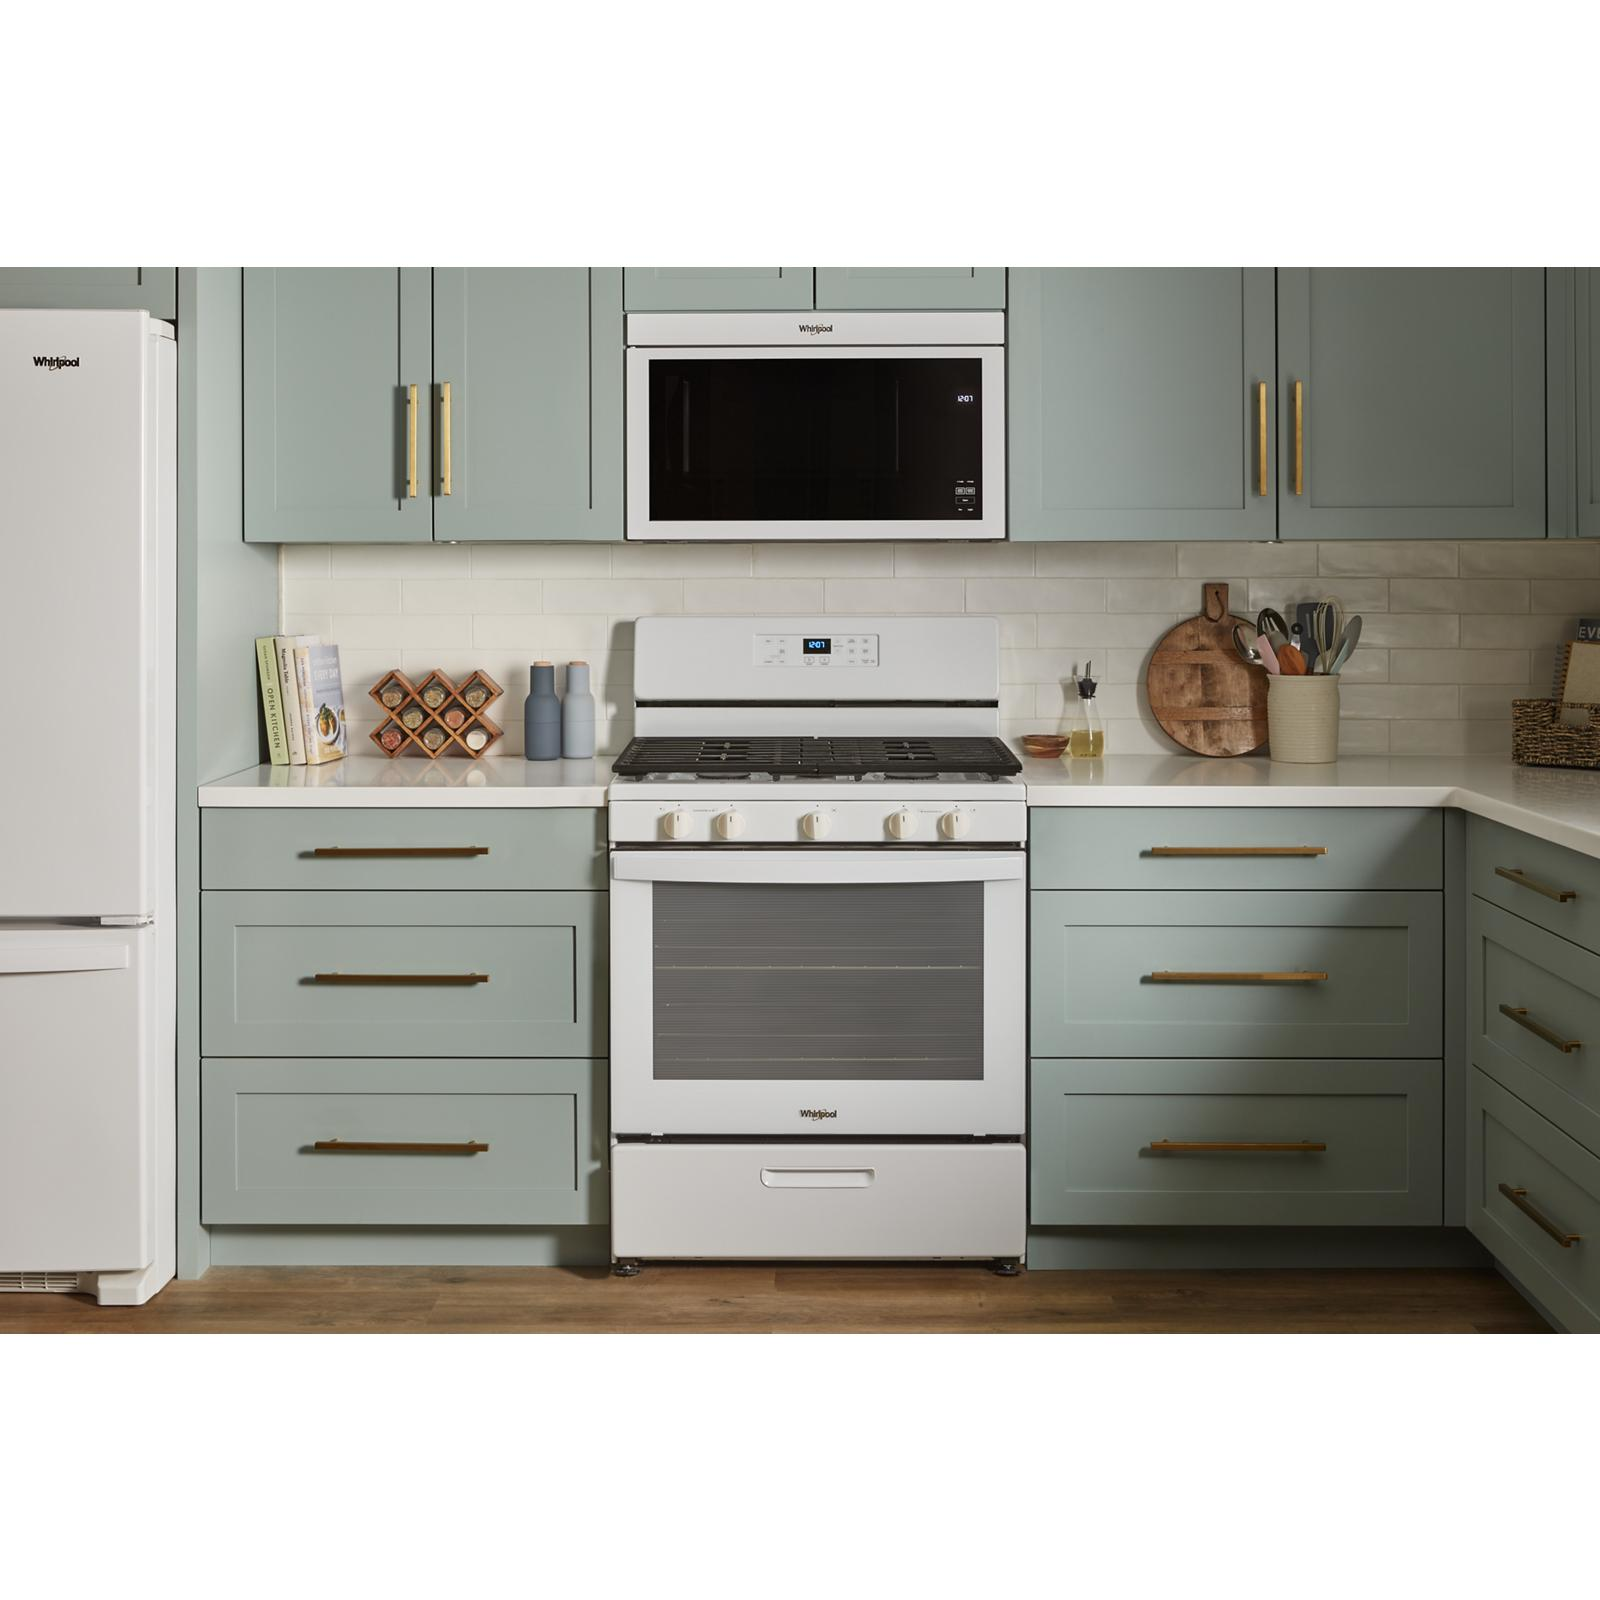 Whirlpool - 1.1 cu. Ft  Over the range Microwave in White - YWMMF5930PW